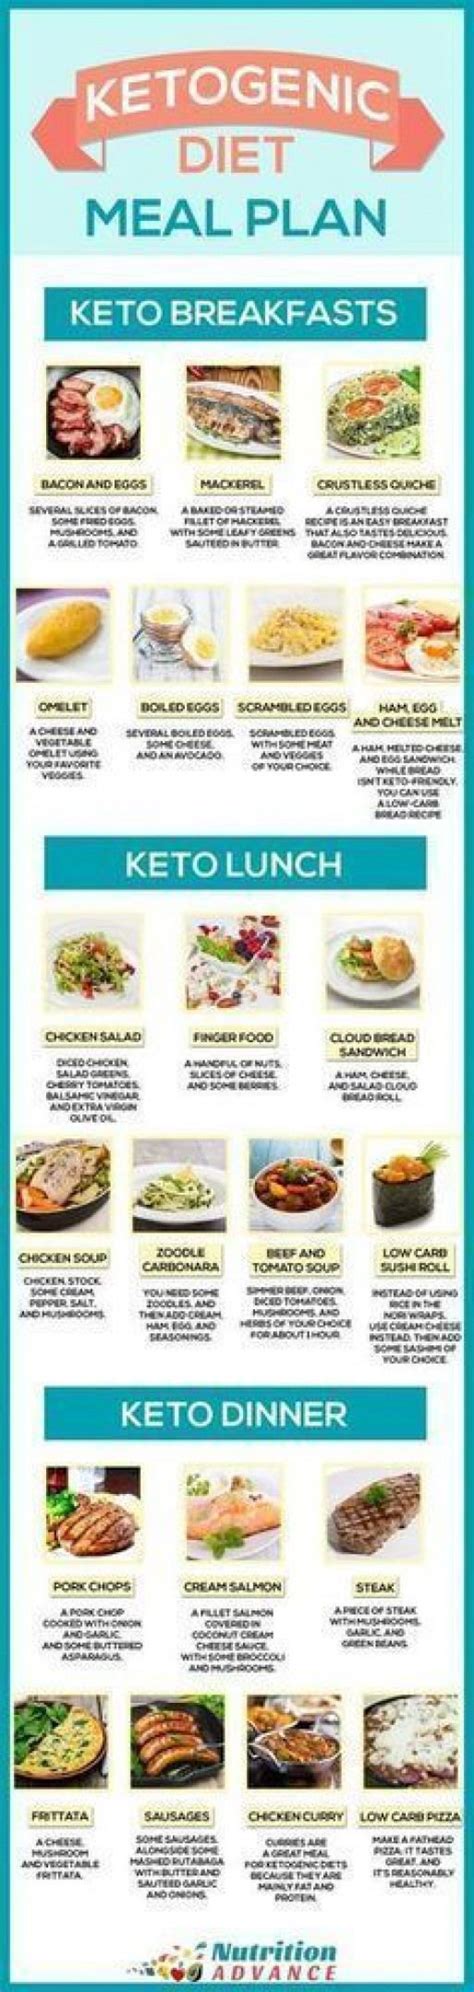 Ketogenic Diet Meal Plan For 7 Days This Infographic Shows Some Ideas For A Ke